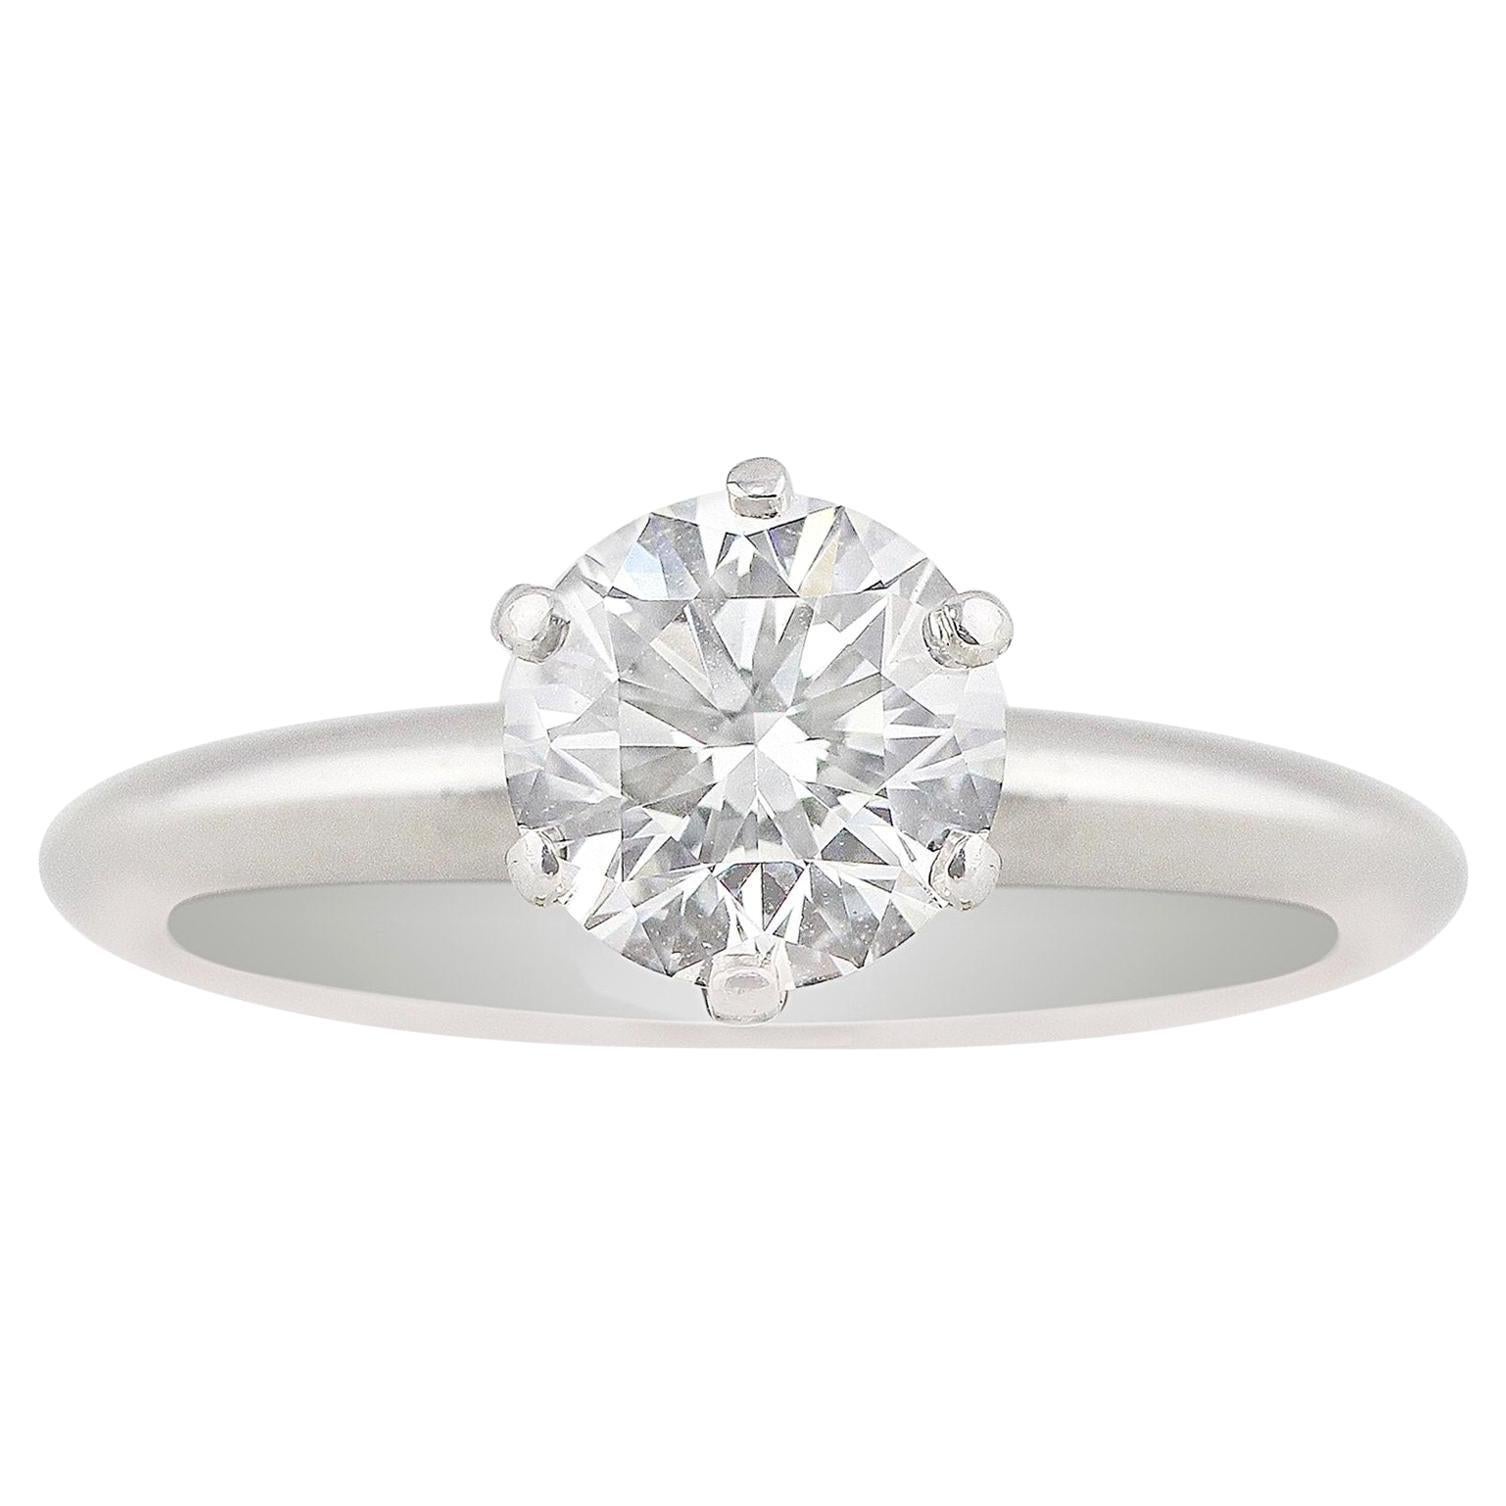 Tiffany & Co. Platinum Diamond Solitaire Ring GIA Certified For Sale